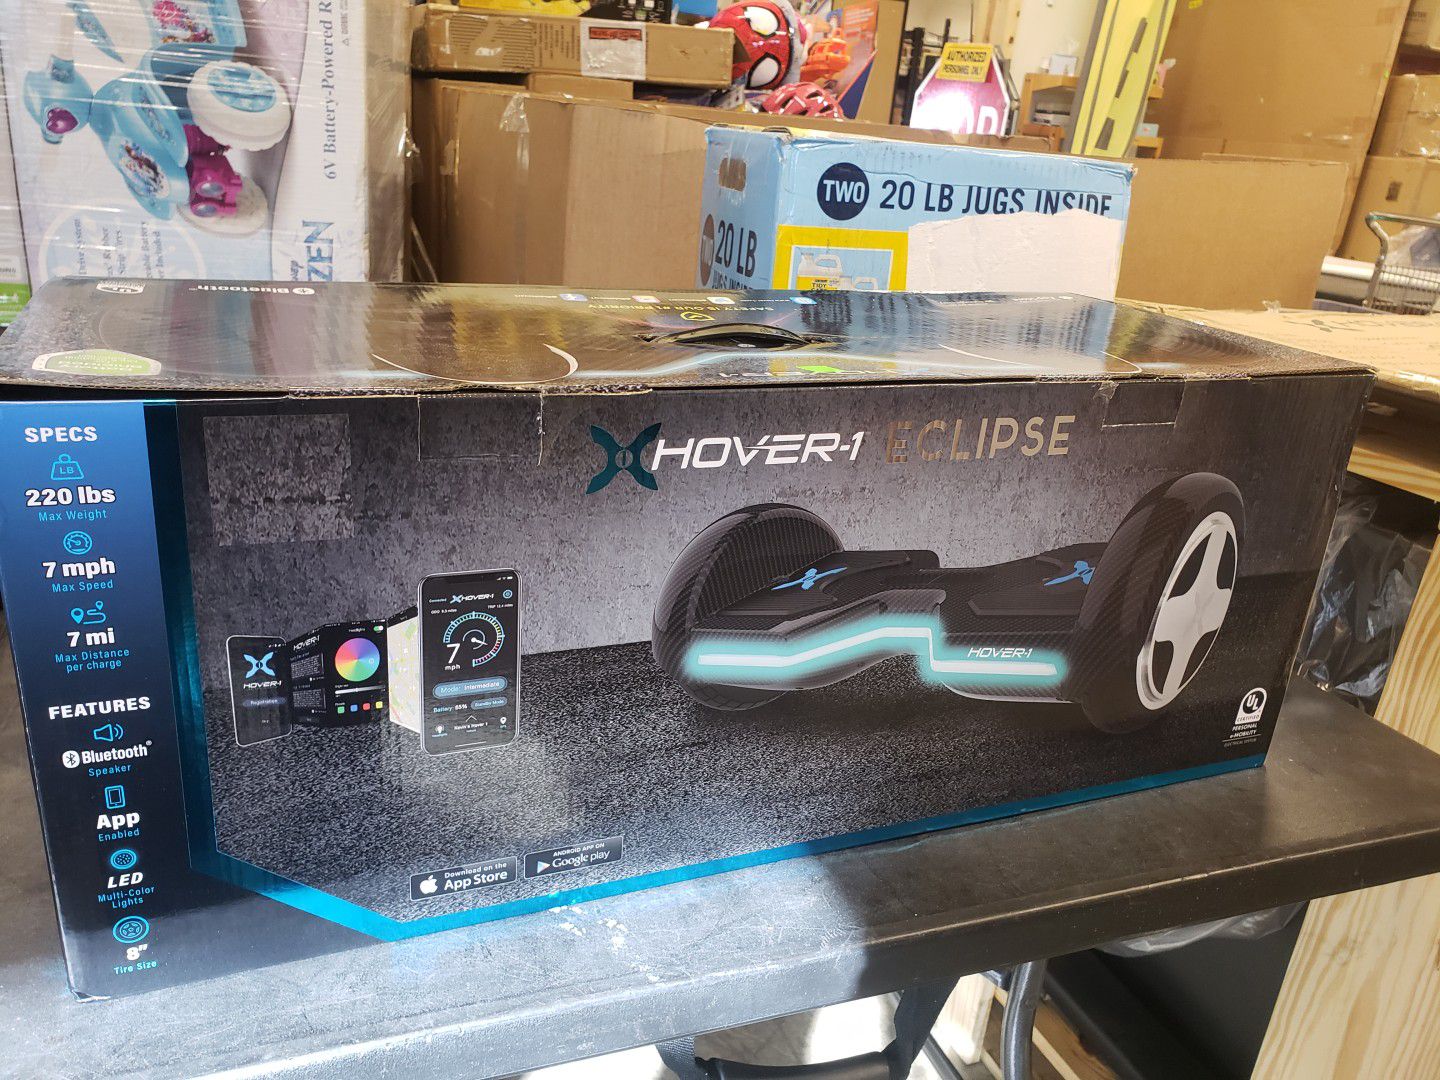 Hover-1 Eclipse hoverboard $148 FIRM